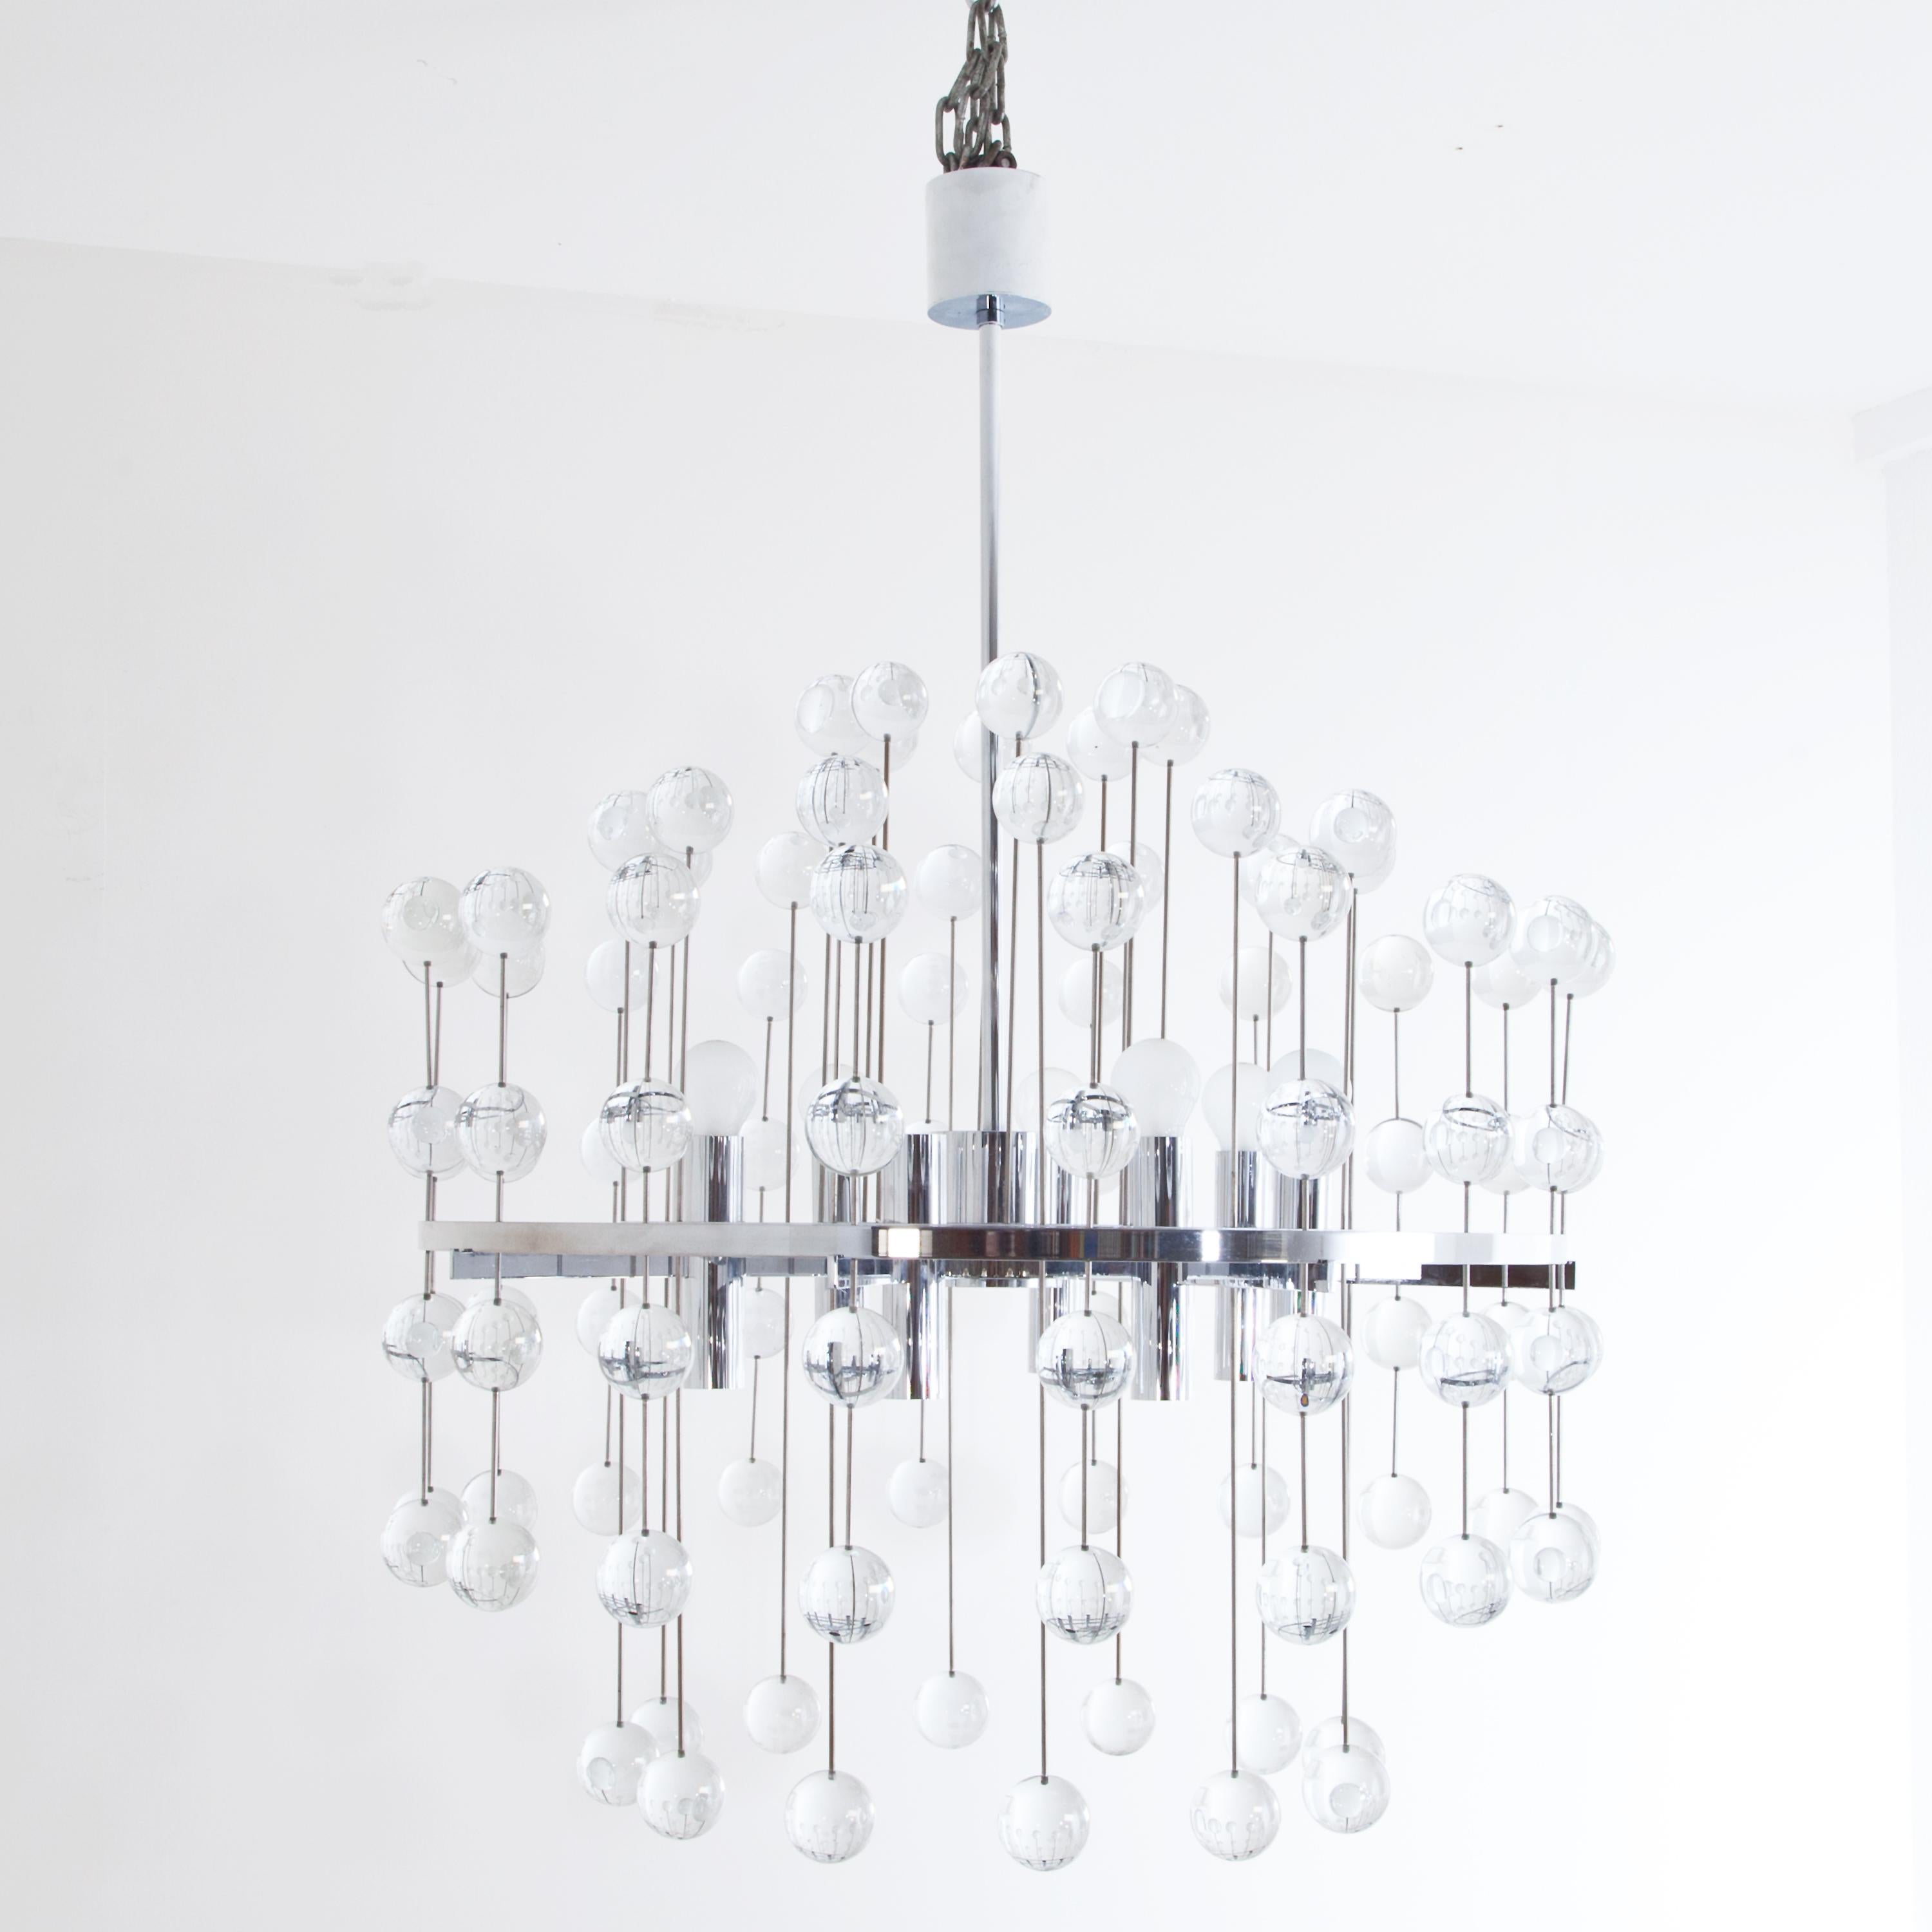 Large ceiling chandelier made of chromed steel with solid glass spheres arranged radially on thin rods.
Aloys Gangkofner (1920 Reichenberg -2003 Munich) equipped numerous public spaces with his lighting fixtures, including the Meistersingerhalle in